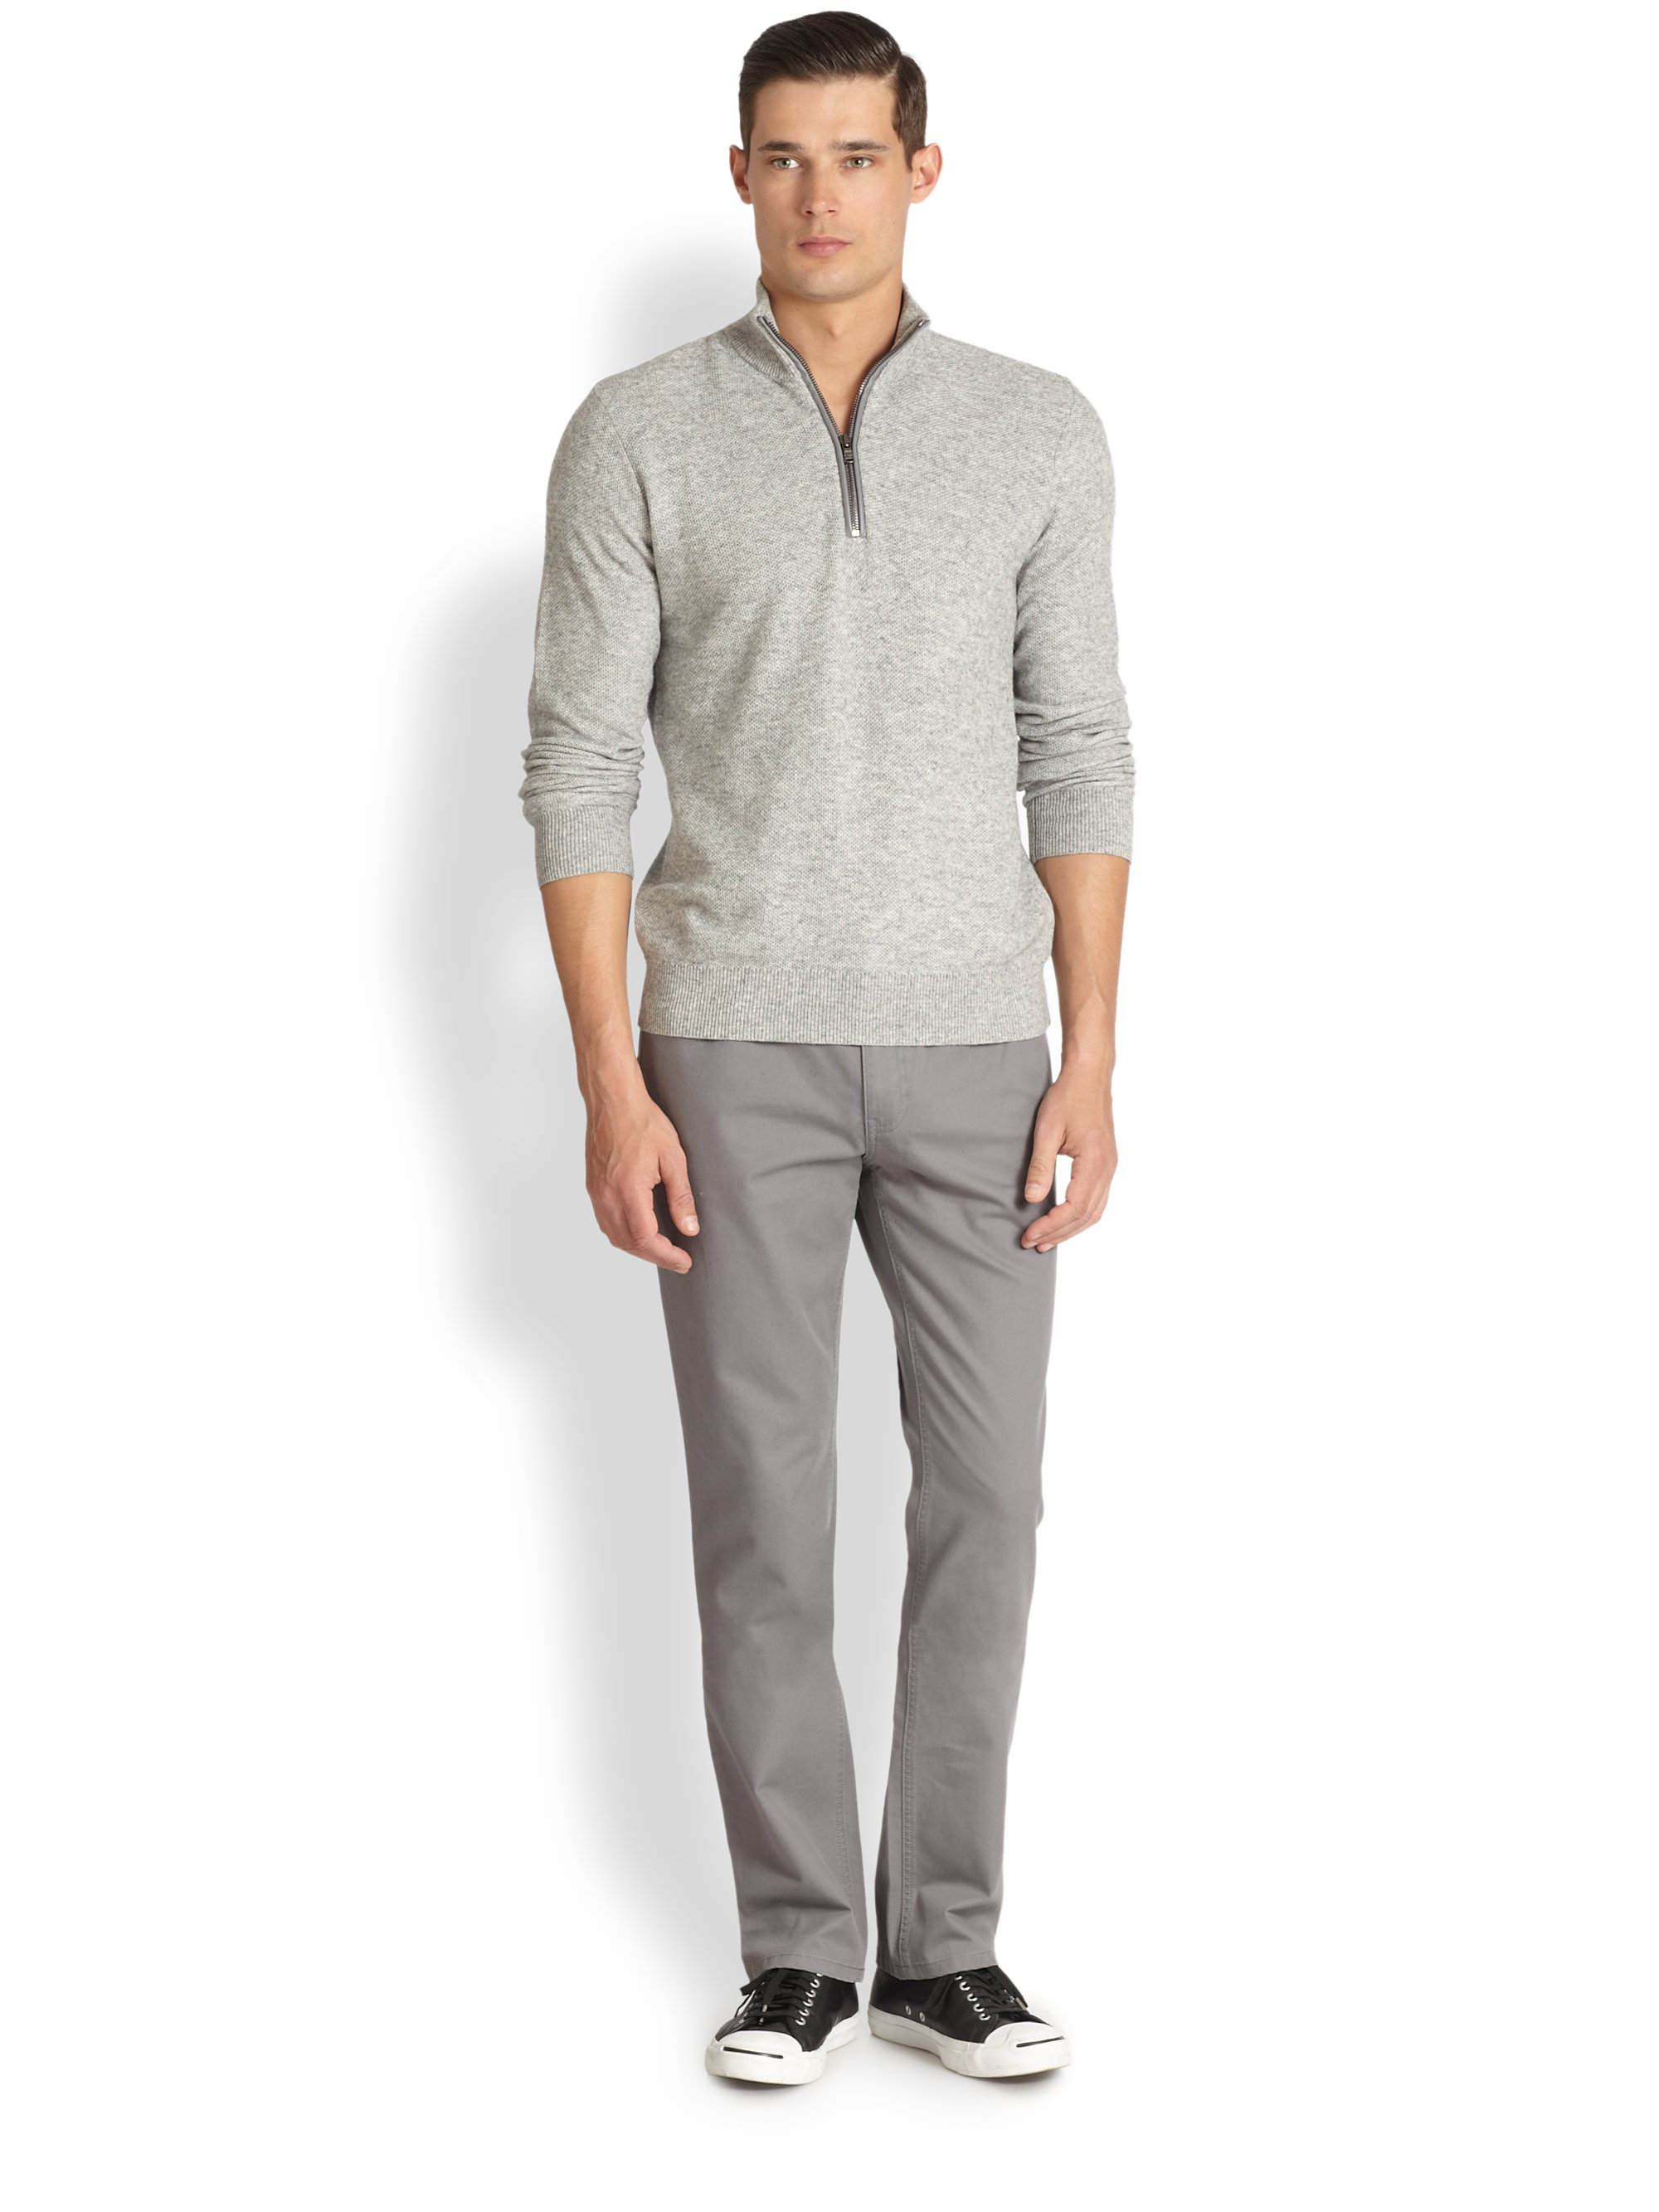 Lyst - Michael Kors Leather Trimmed Sweater in Gray for Men